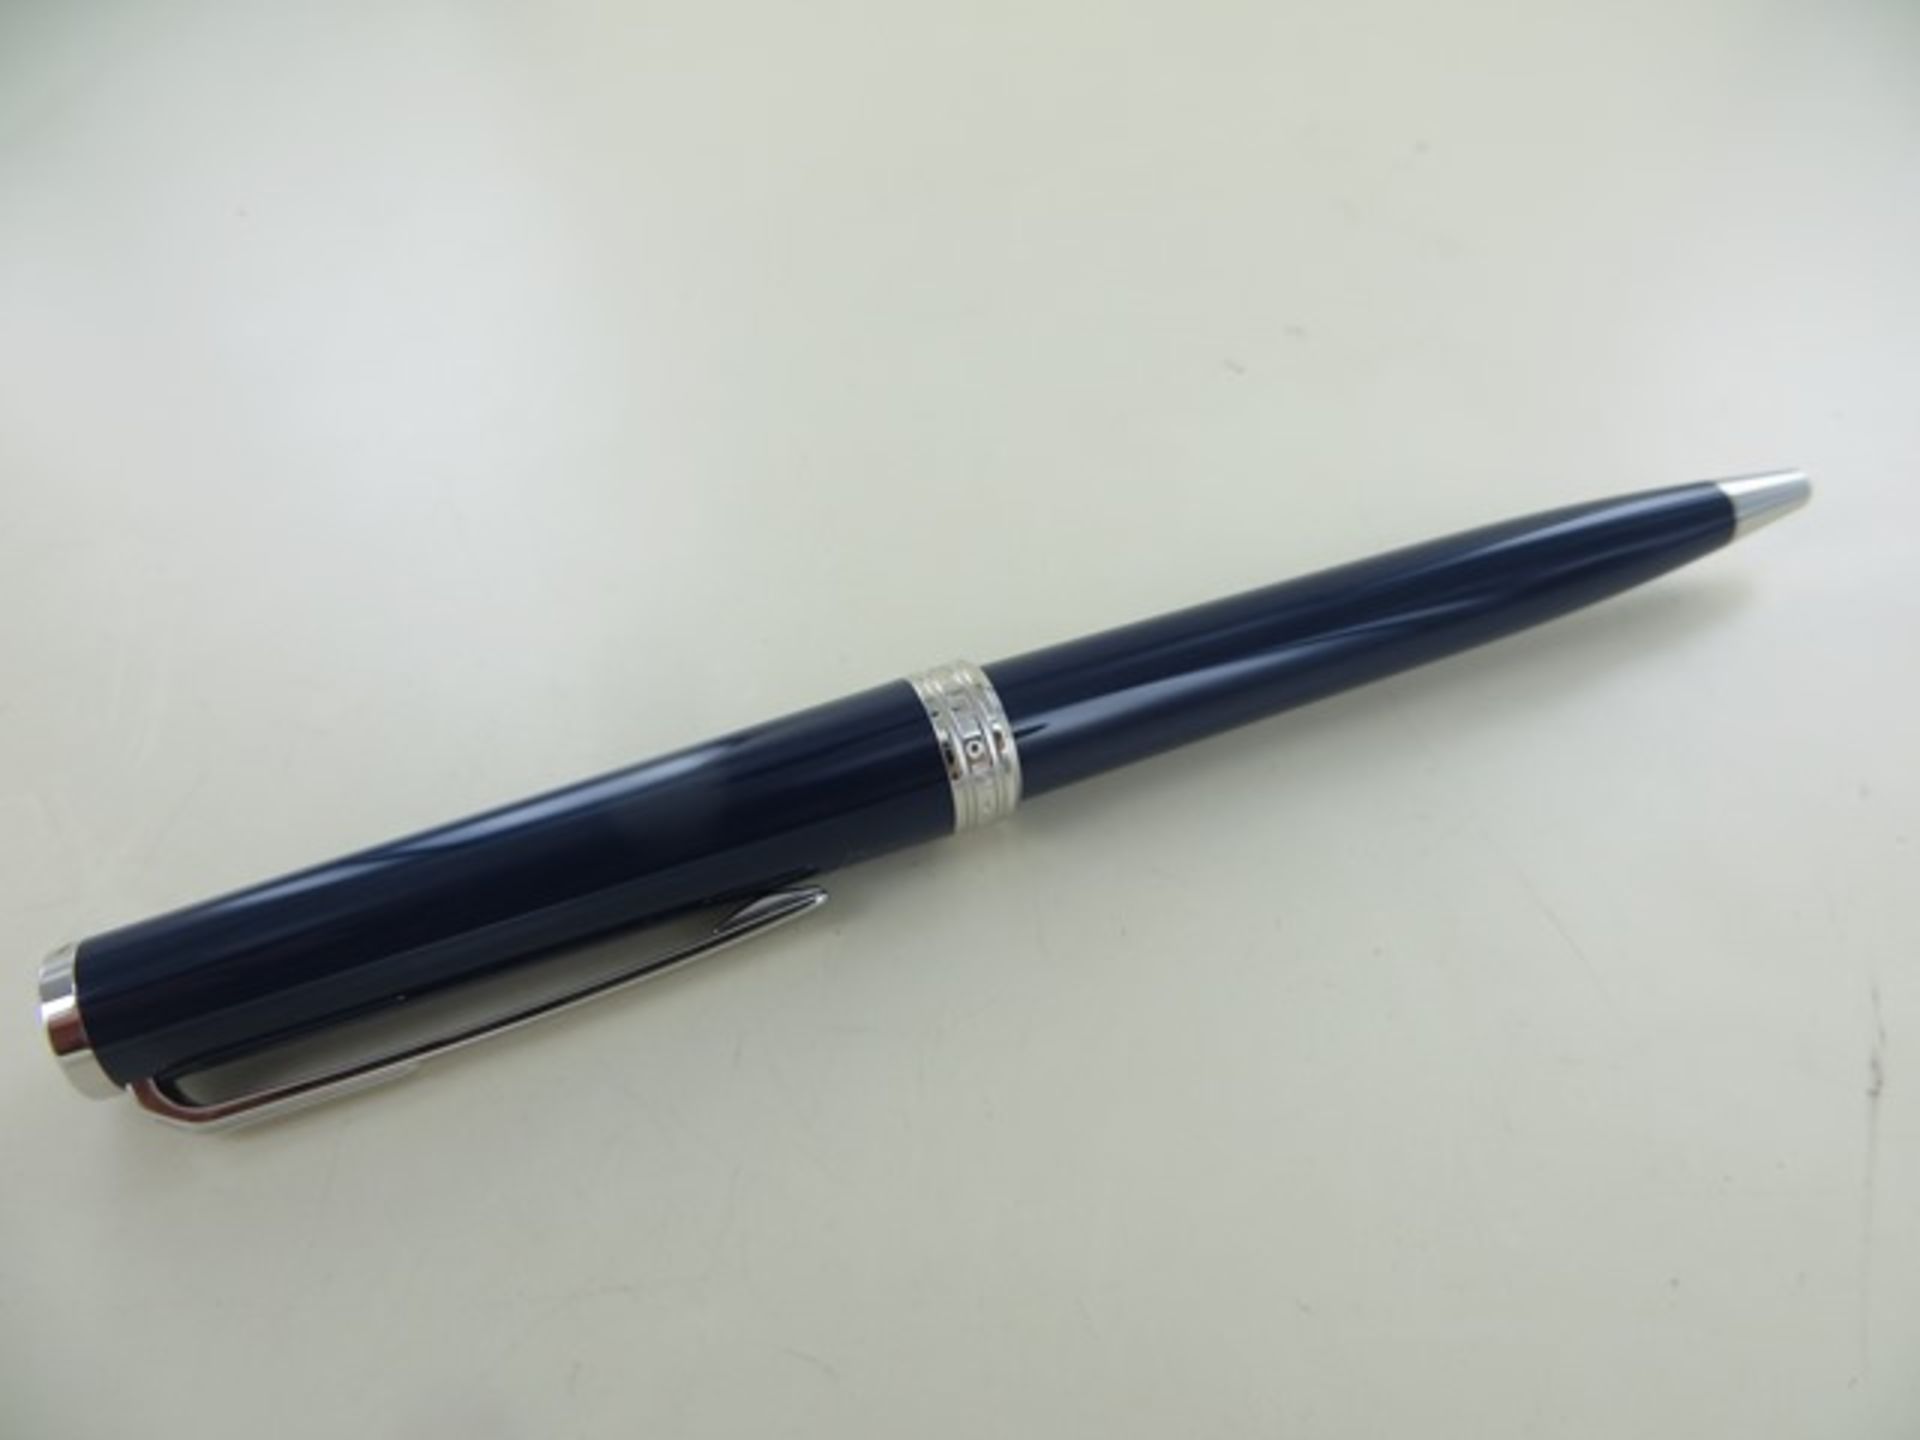 Tray containing 18 x Montblanc PIX Blue Ballpoint Pen Art No 114810 RRP £175 each. Please note: This - Image 2 of 2